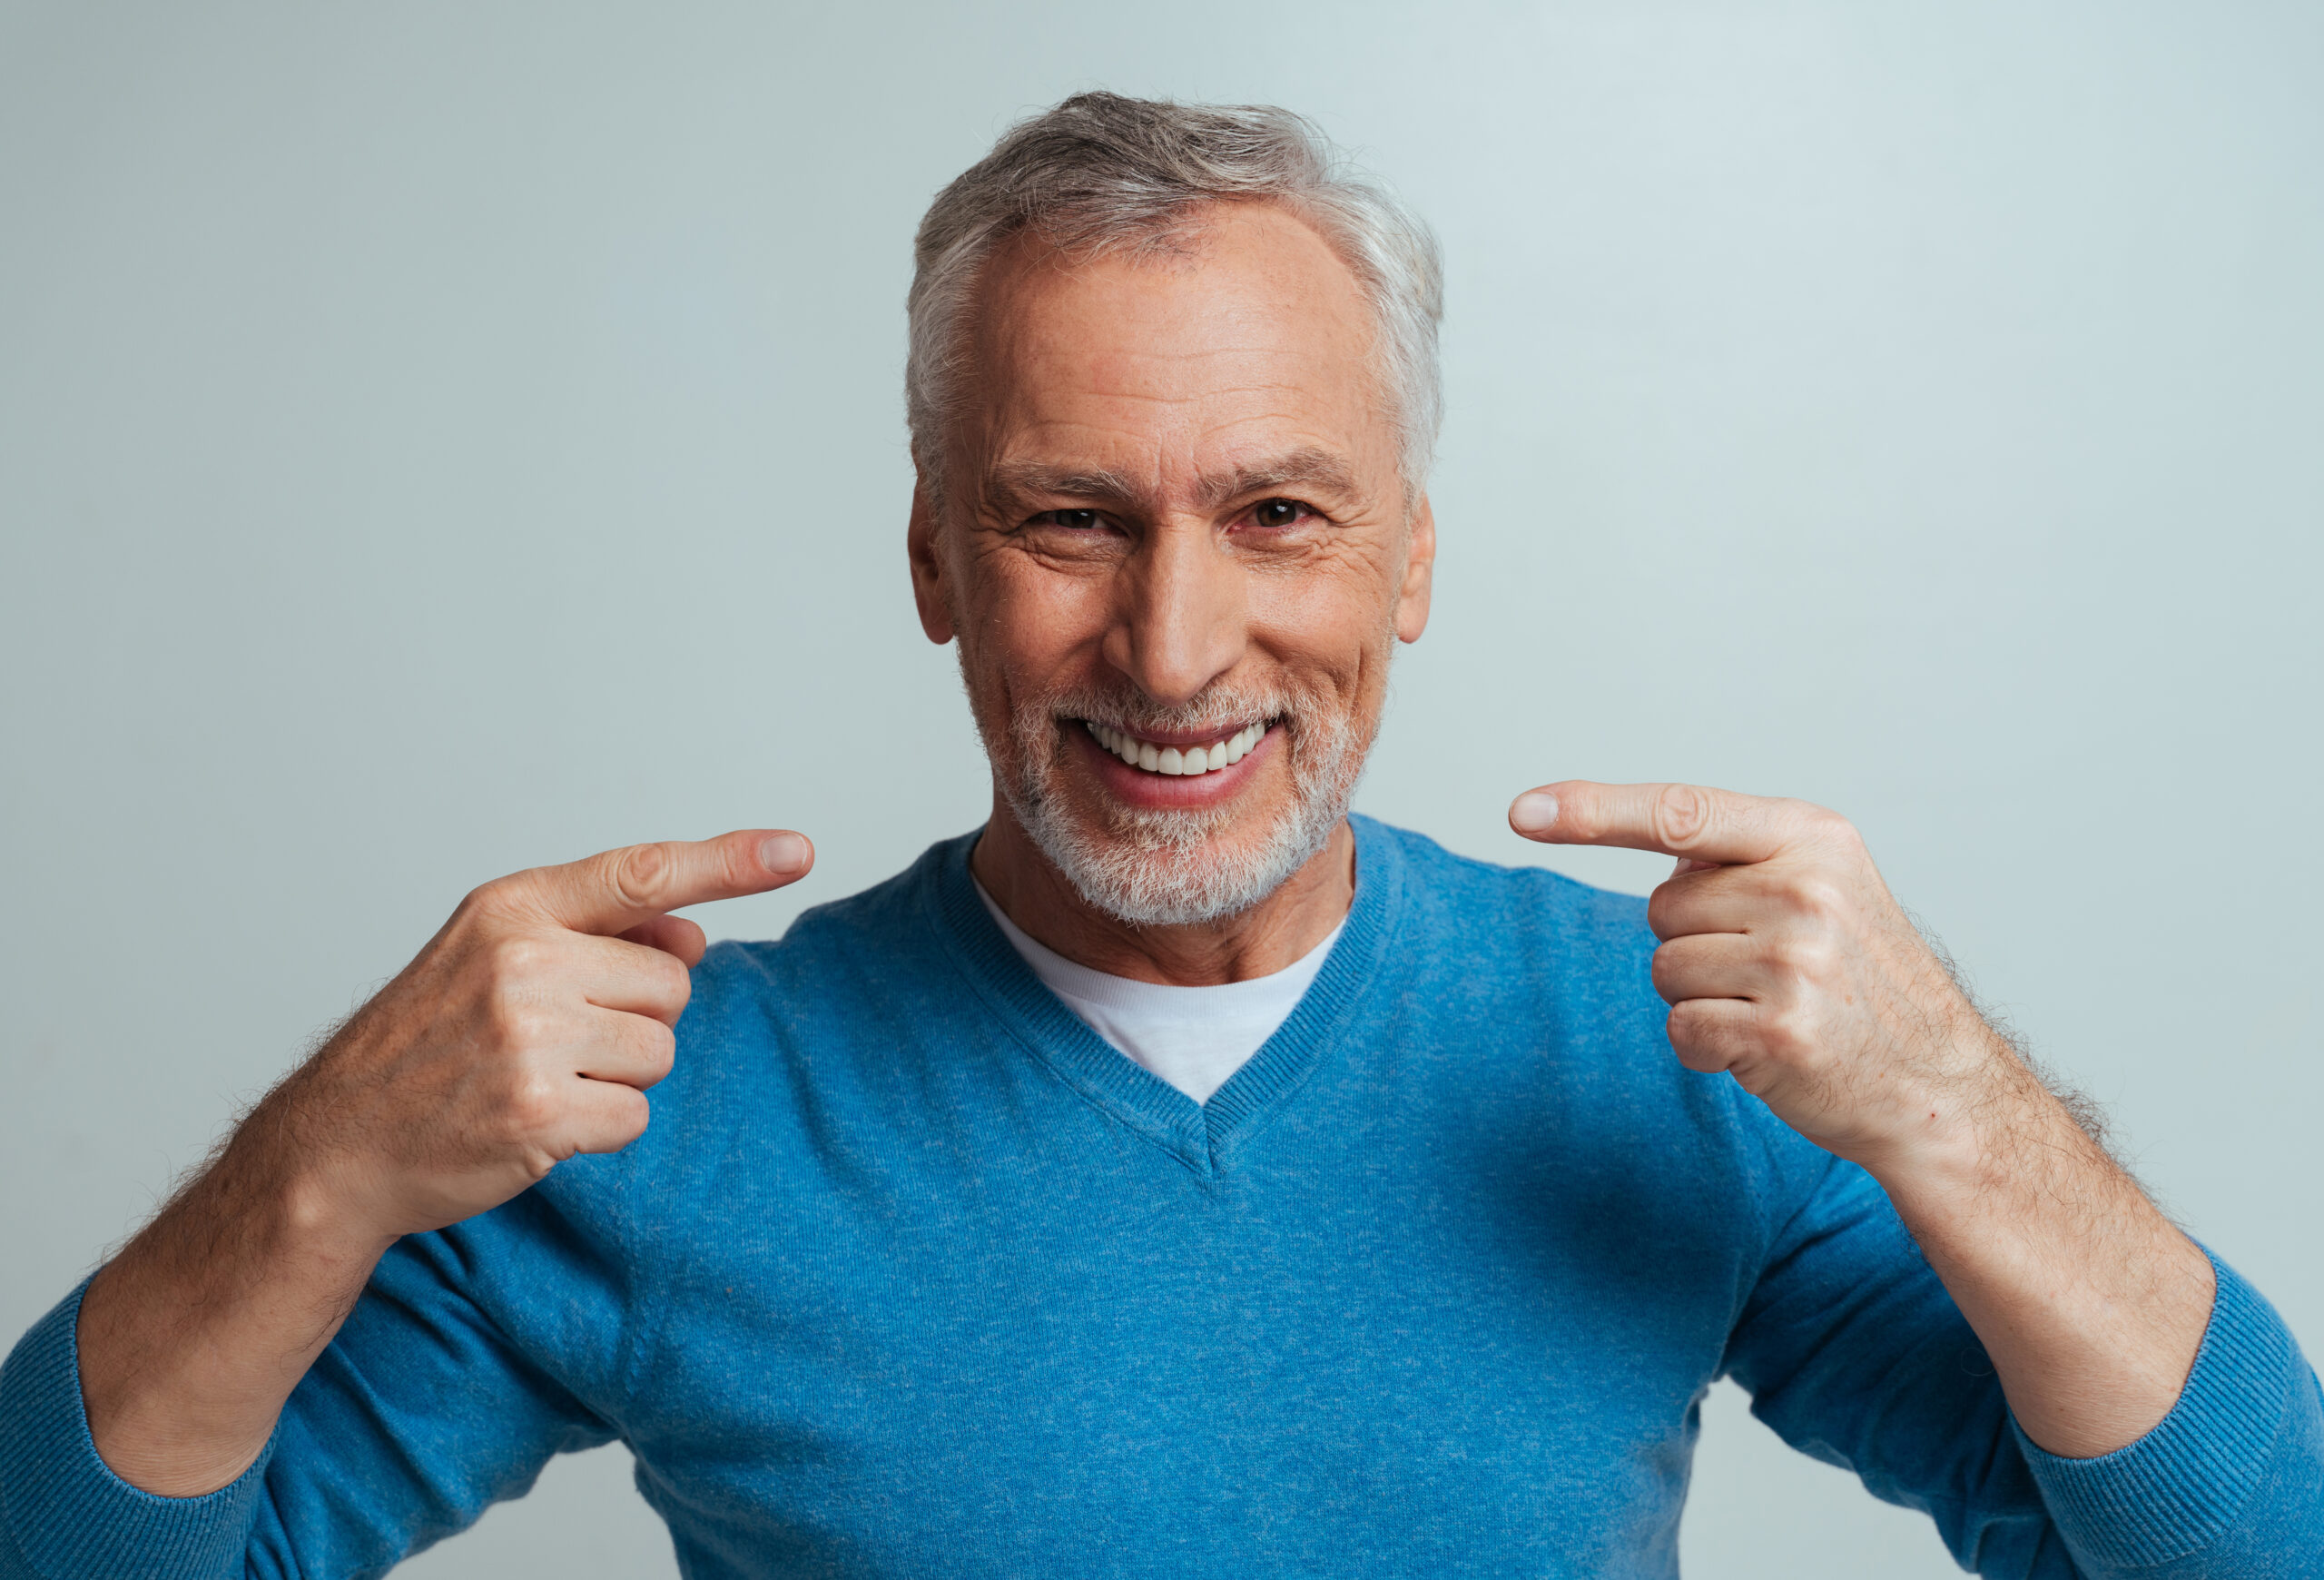 Everything You Need to Know About Dental Implants Dental Implants Seguin TX Seguin Dentures Bella Vista Dental dentist in Seguin TX Dr. Lara Perry Dr. Federico Gonzalez